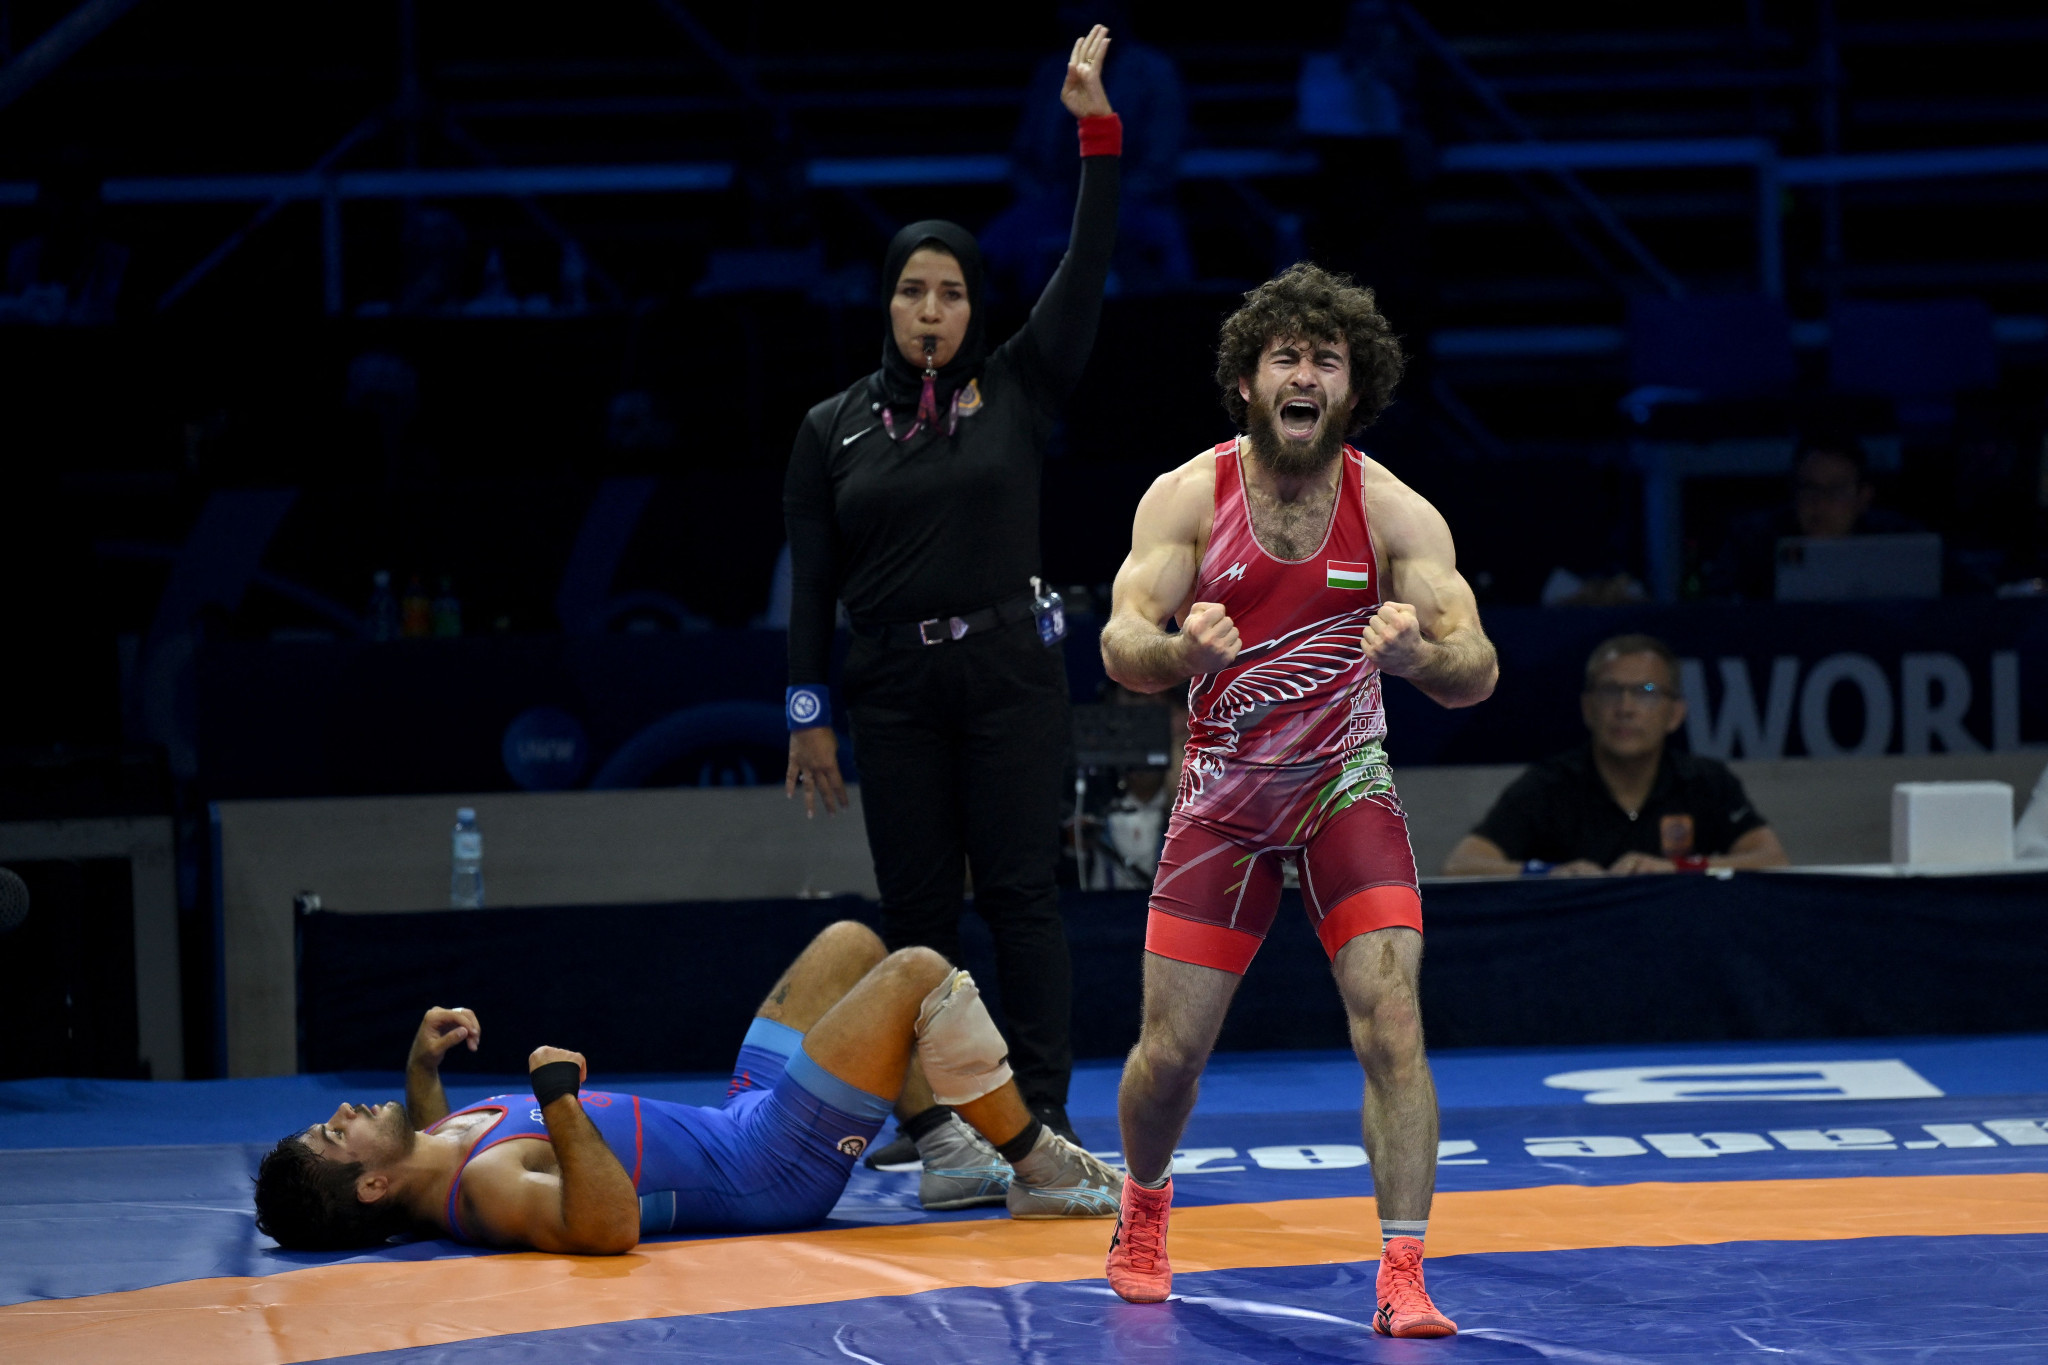 Ismail Musukaev of Hungary, right, overcame Puerto Rico's Sebastian Rivera, left, for men's freestyle 65kg gold ©Getty Images